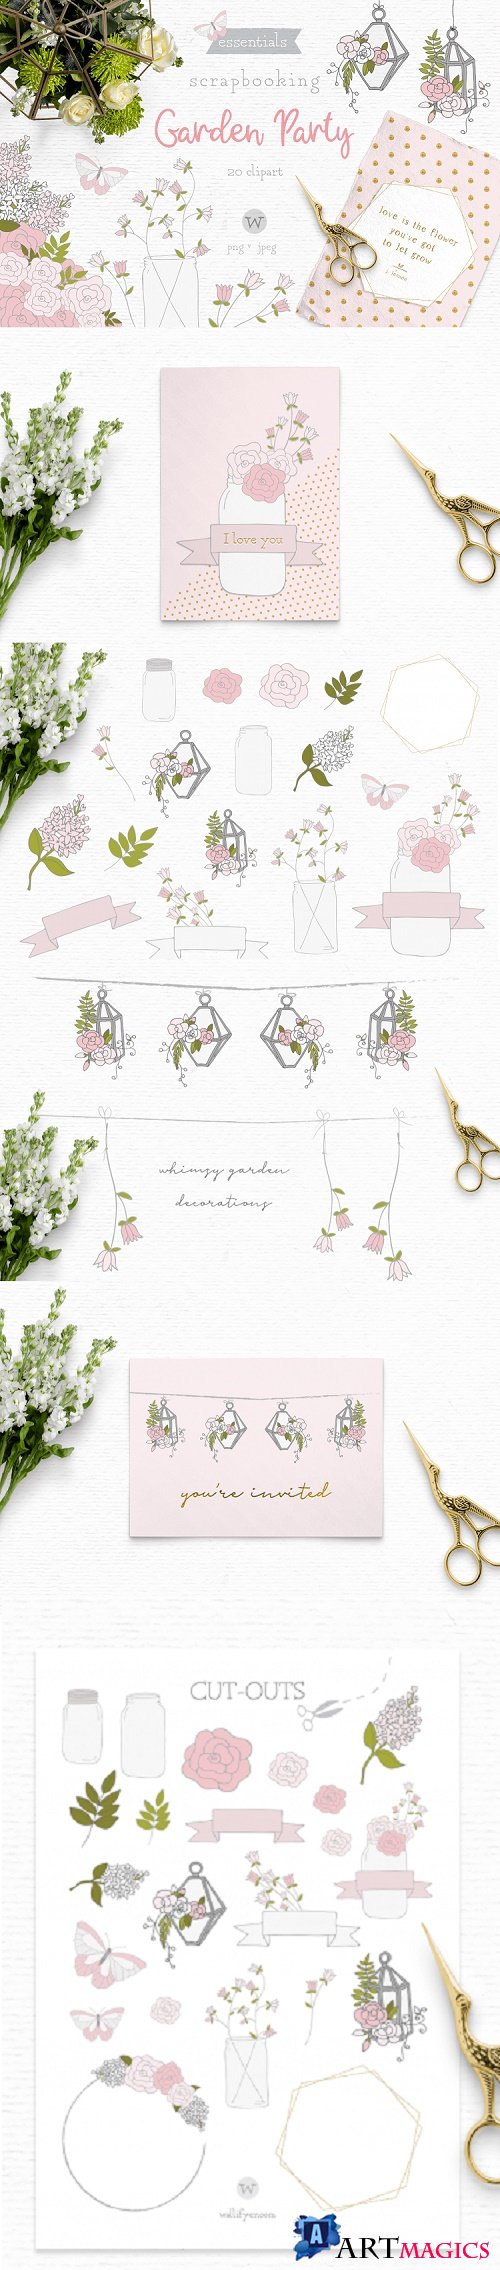 Summer clipart, floral clipart, whimsical clipart, wedding - 288889